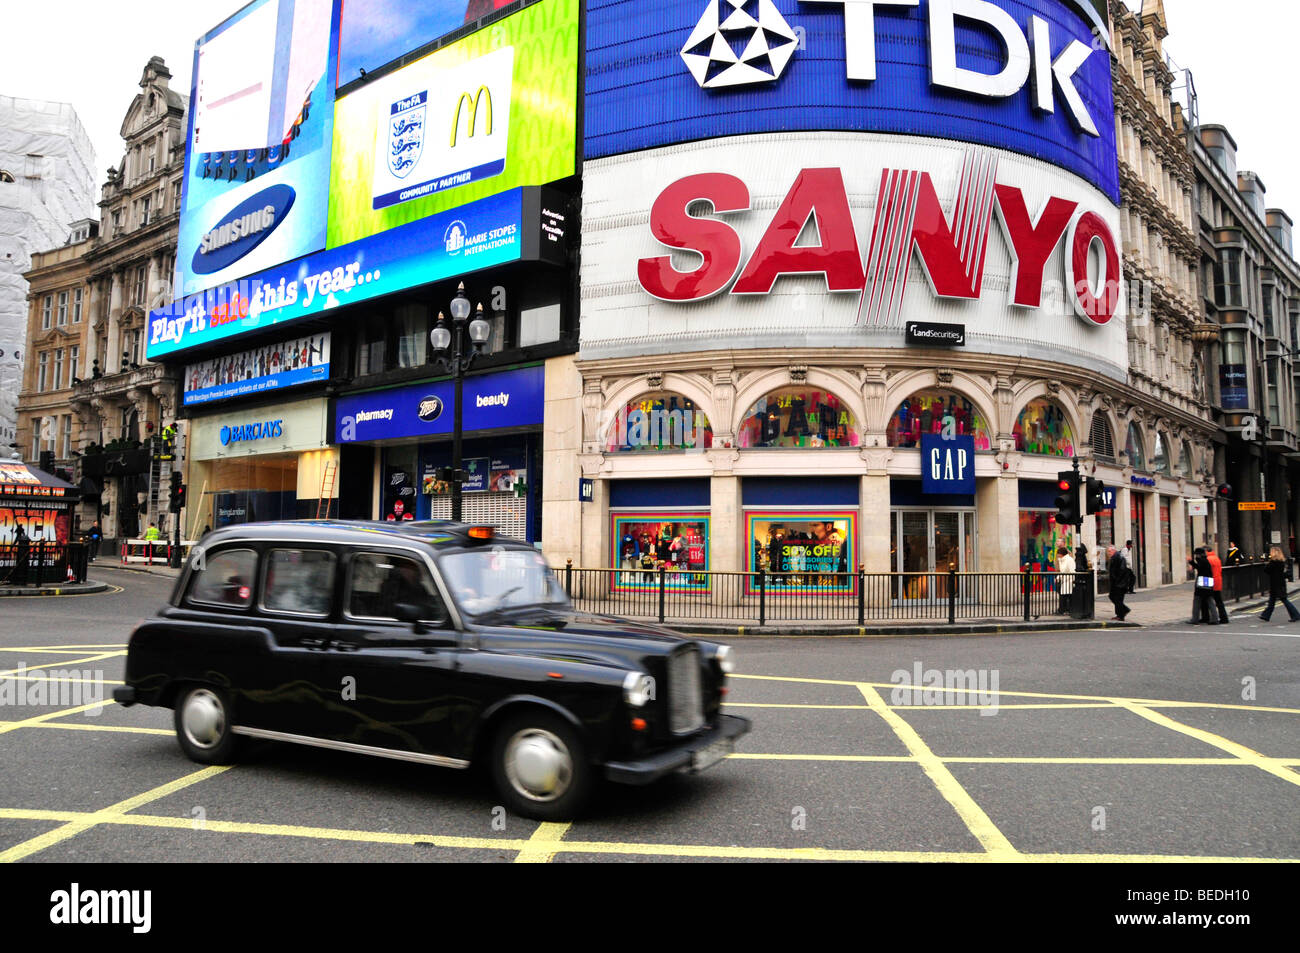 Taxi at Picadilly Circus, London, England, Great Britain, Europe Stock Photo